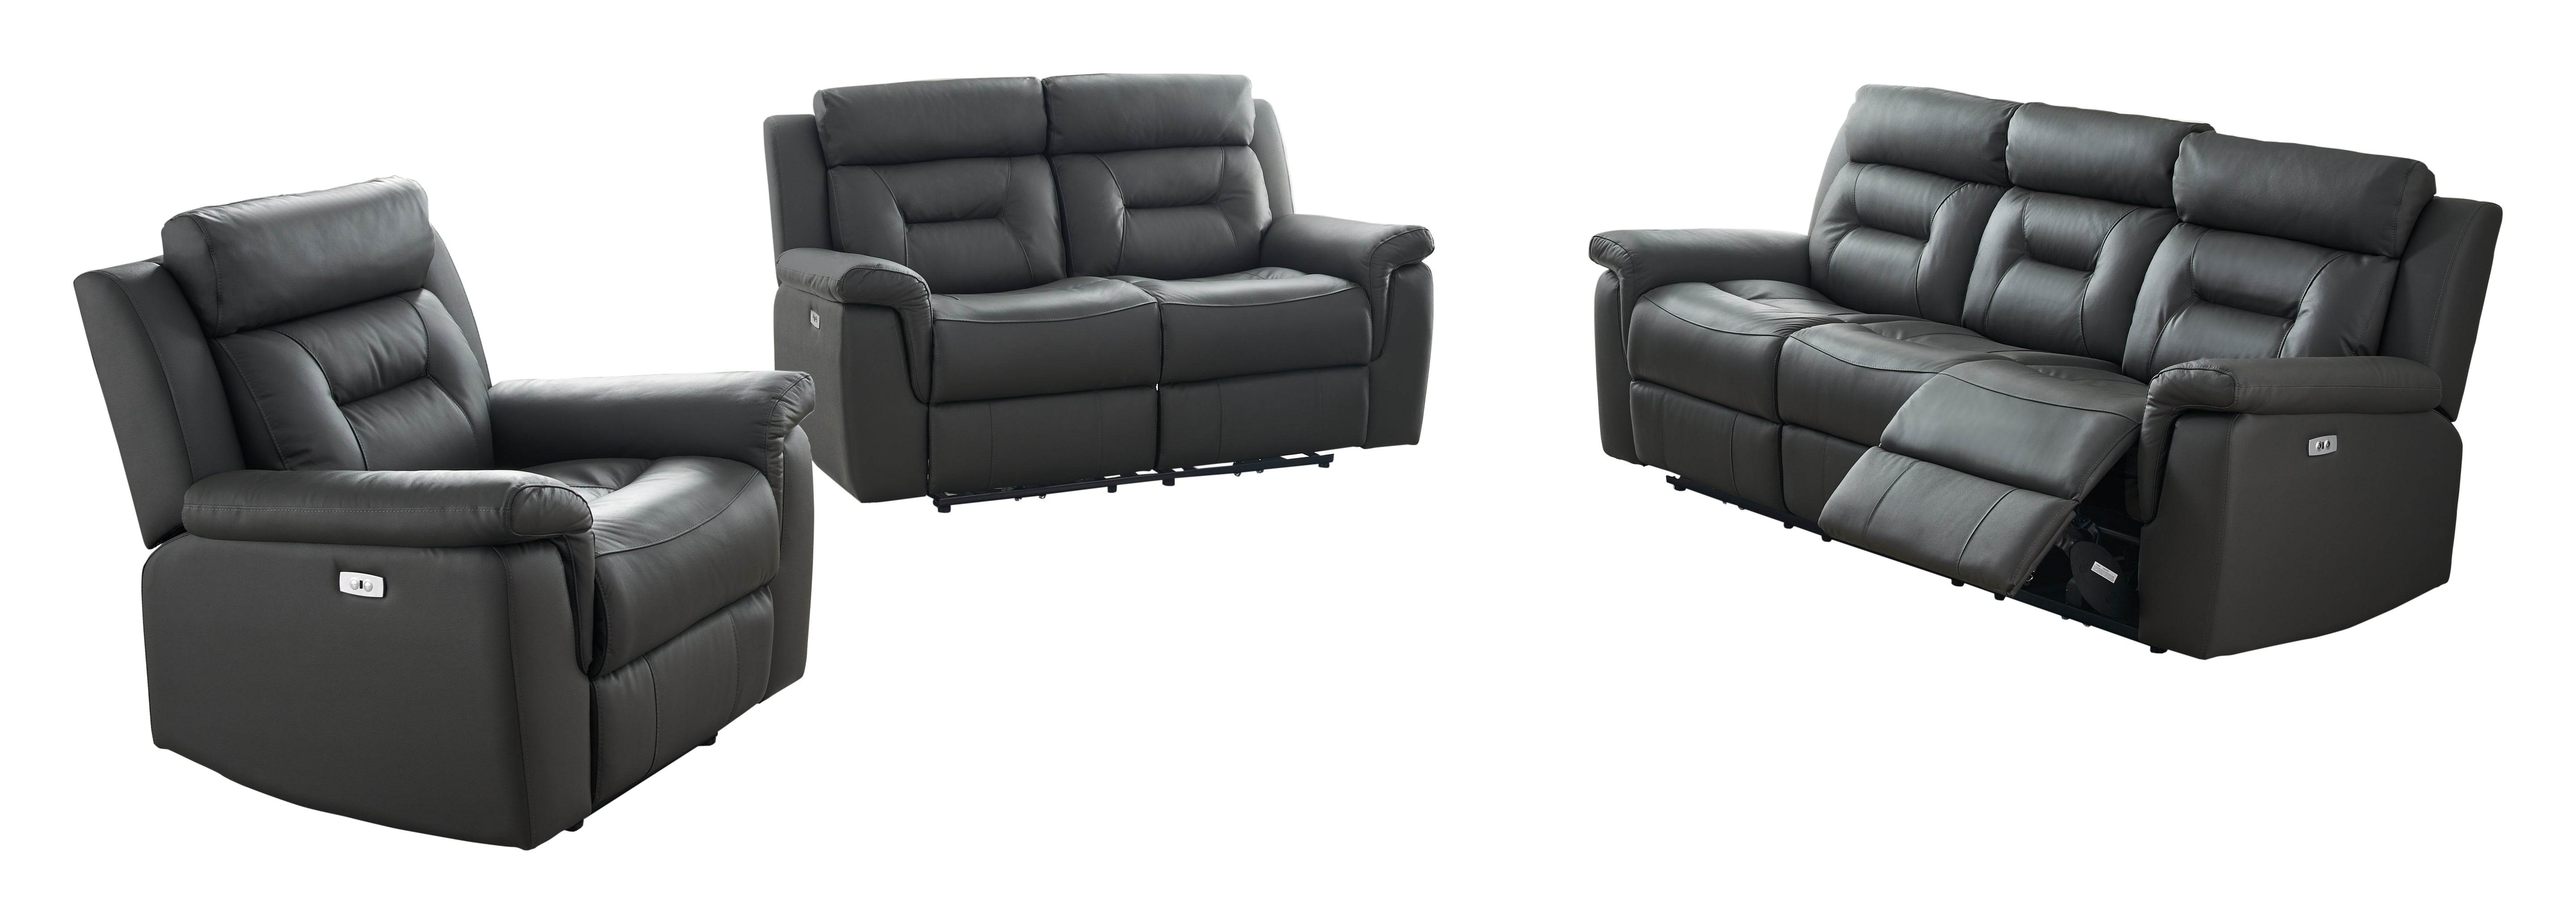 Milan 3 Seater Sofa With Power Recliner and USB port